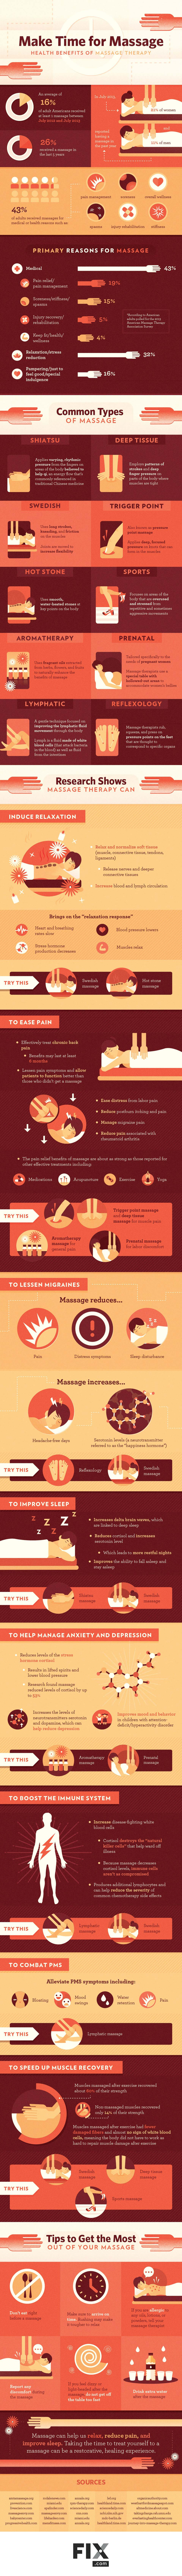 Timeless Health and Wellness Benefits of Massage Therapy - Infographic